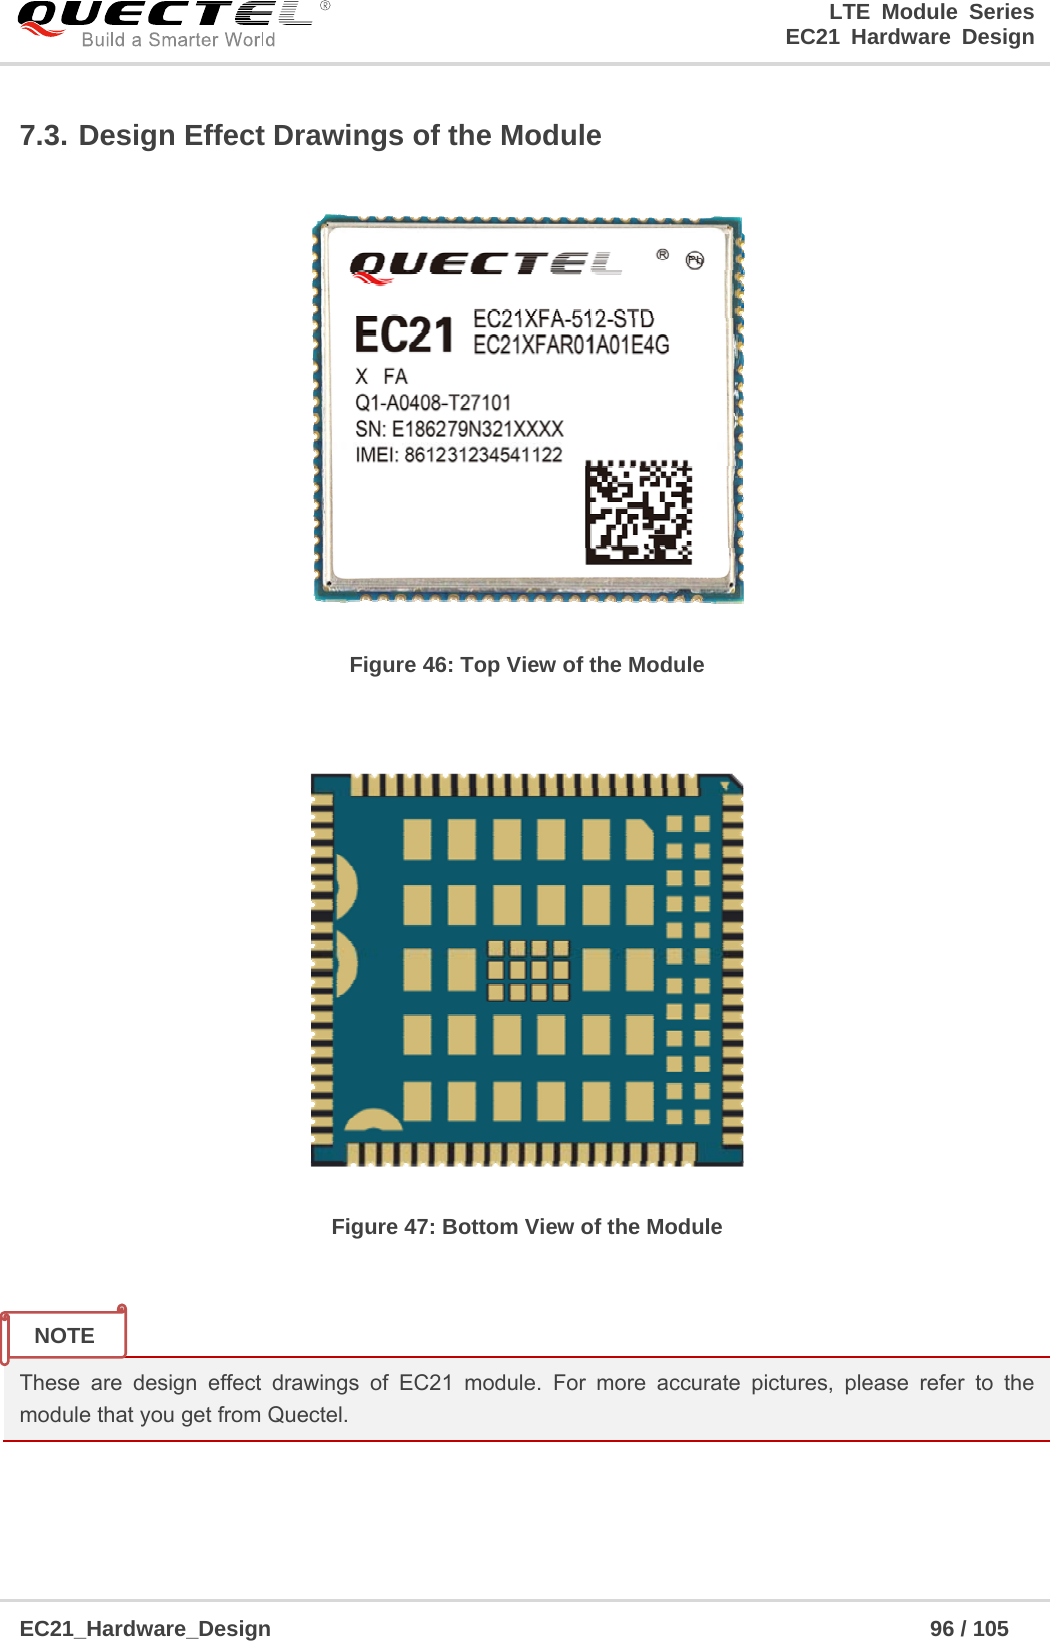                                                                        LTE Module Series                                                                 EC21 Hardware Design  EC21_Hardware_Design                                                            96 / 105    7.3. Design Effect Drawings of the Module  Figure 46: Top View of the Module   Figure 47: Bottom View of the Module   These are design effect drawings of EC21 module. For more accurate pictures, please refer to the module that you get from Quectel.    NOTE 